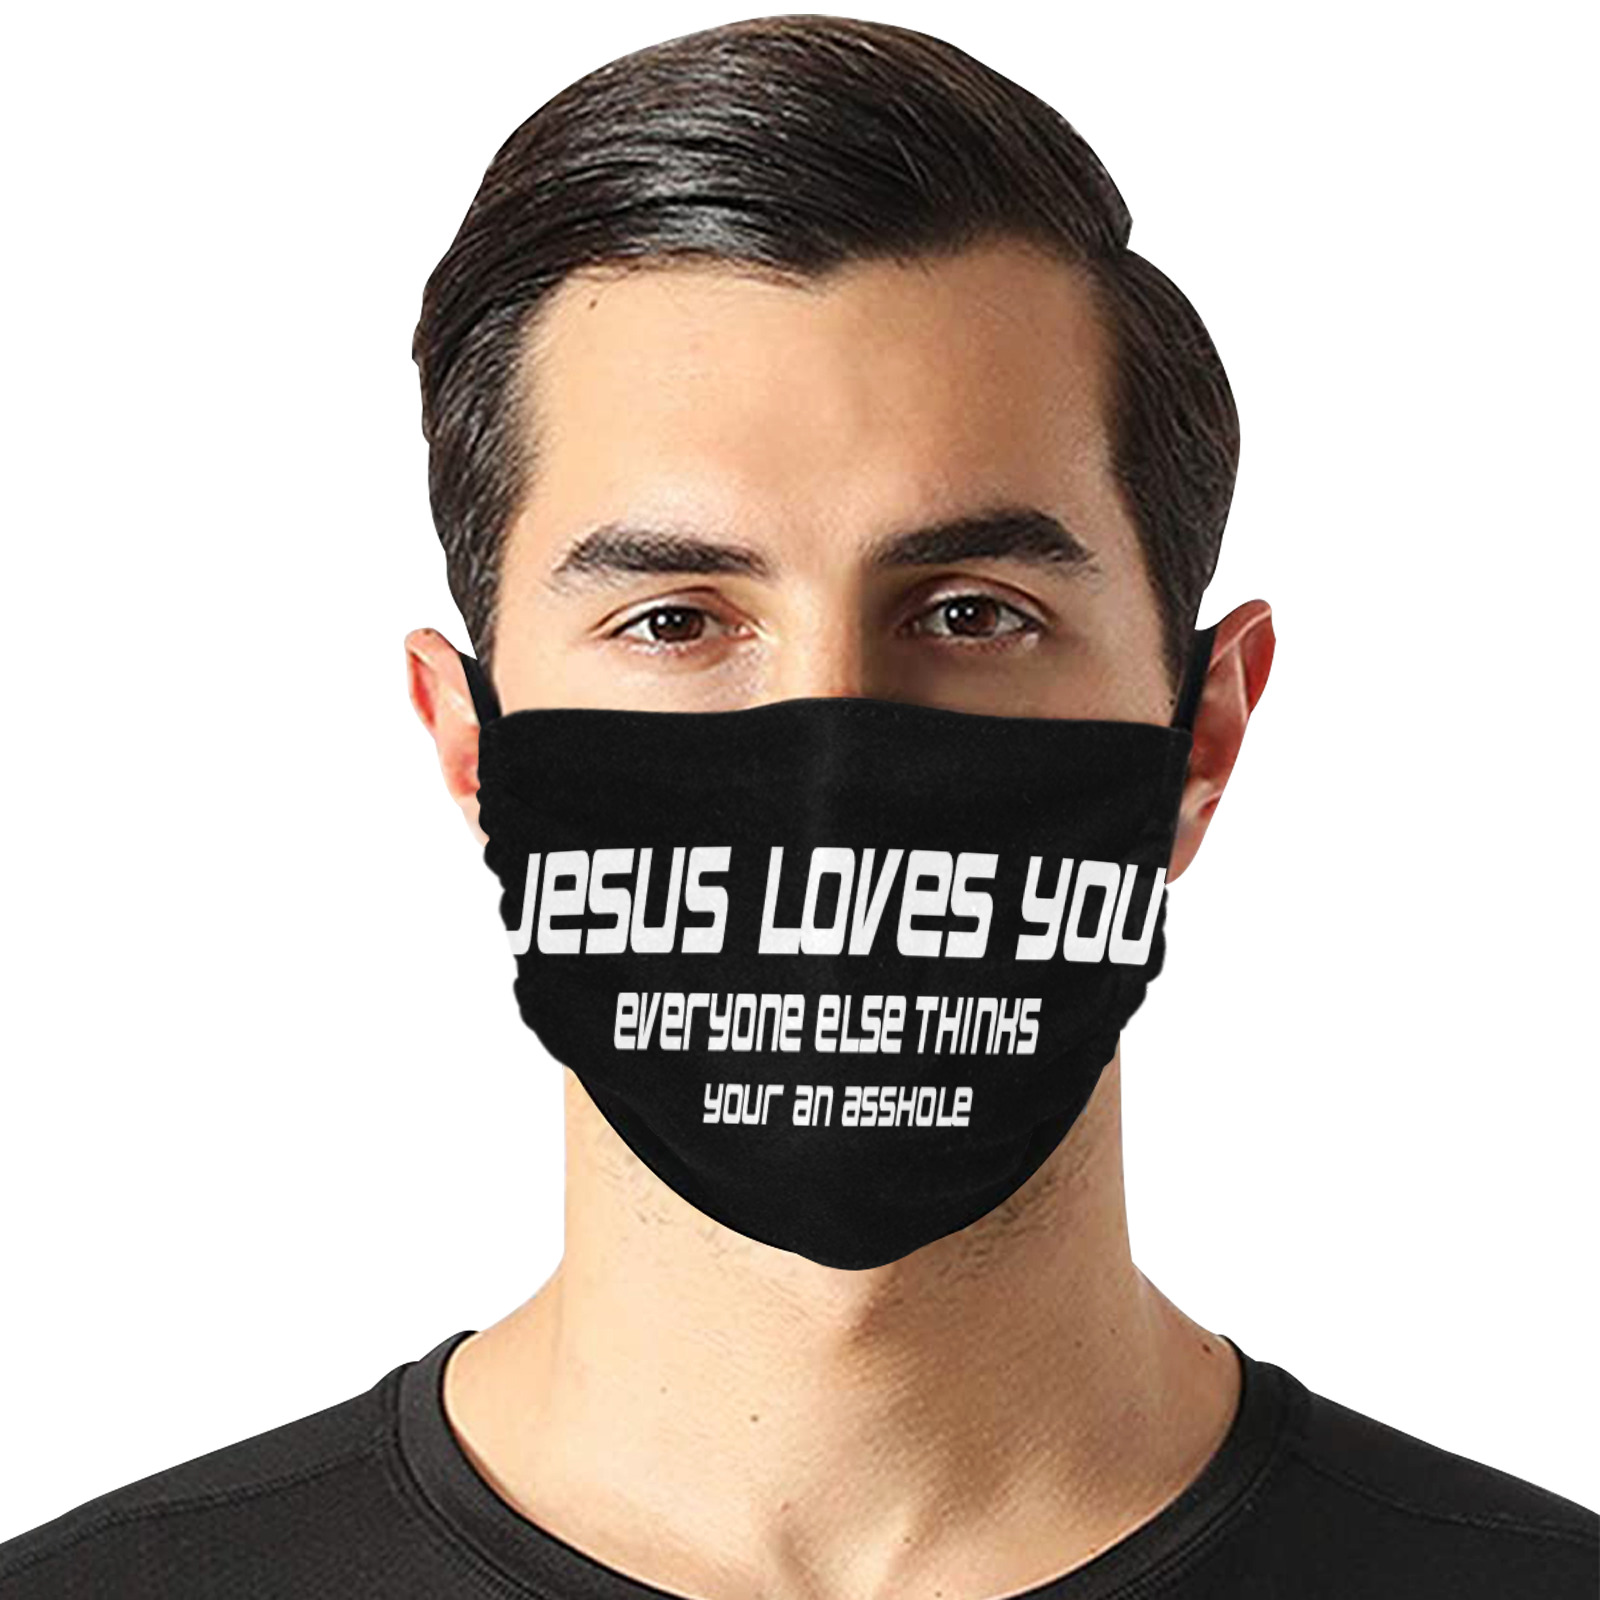 Jesus loves you 1 Flat Mouth Mask with Drawstring